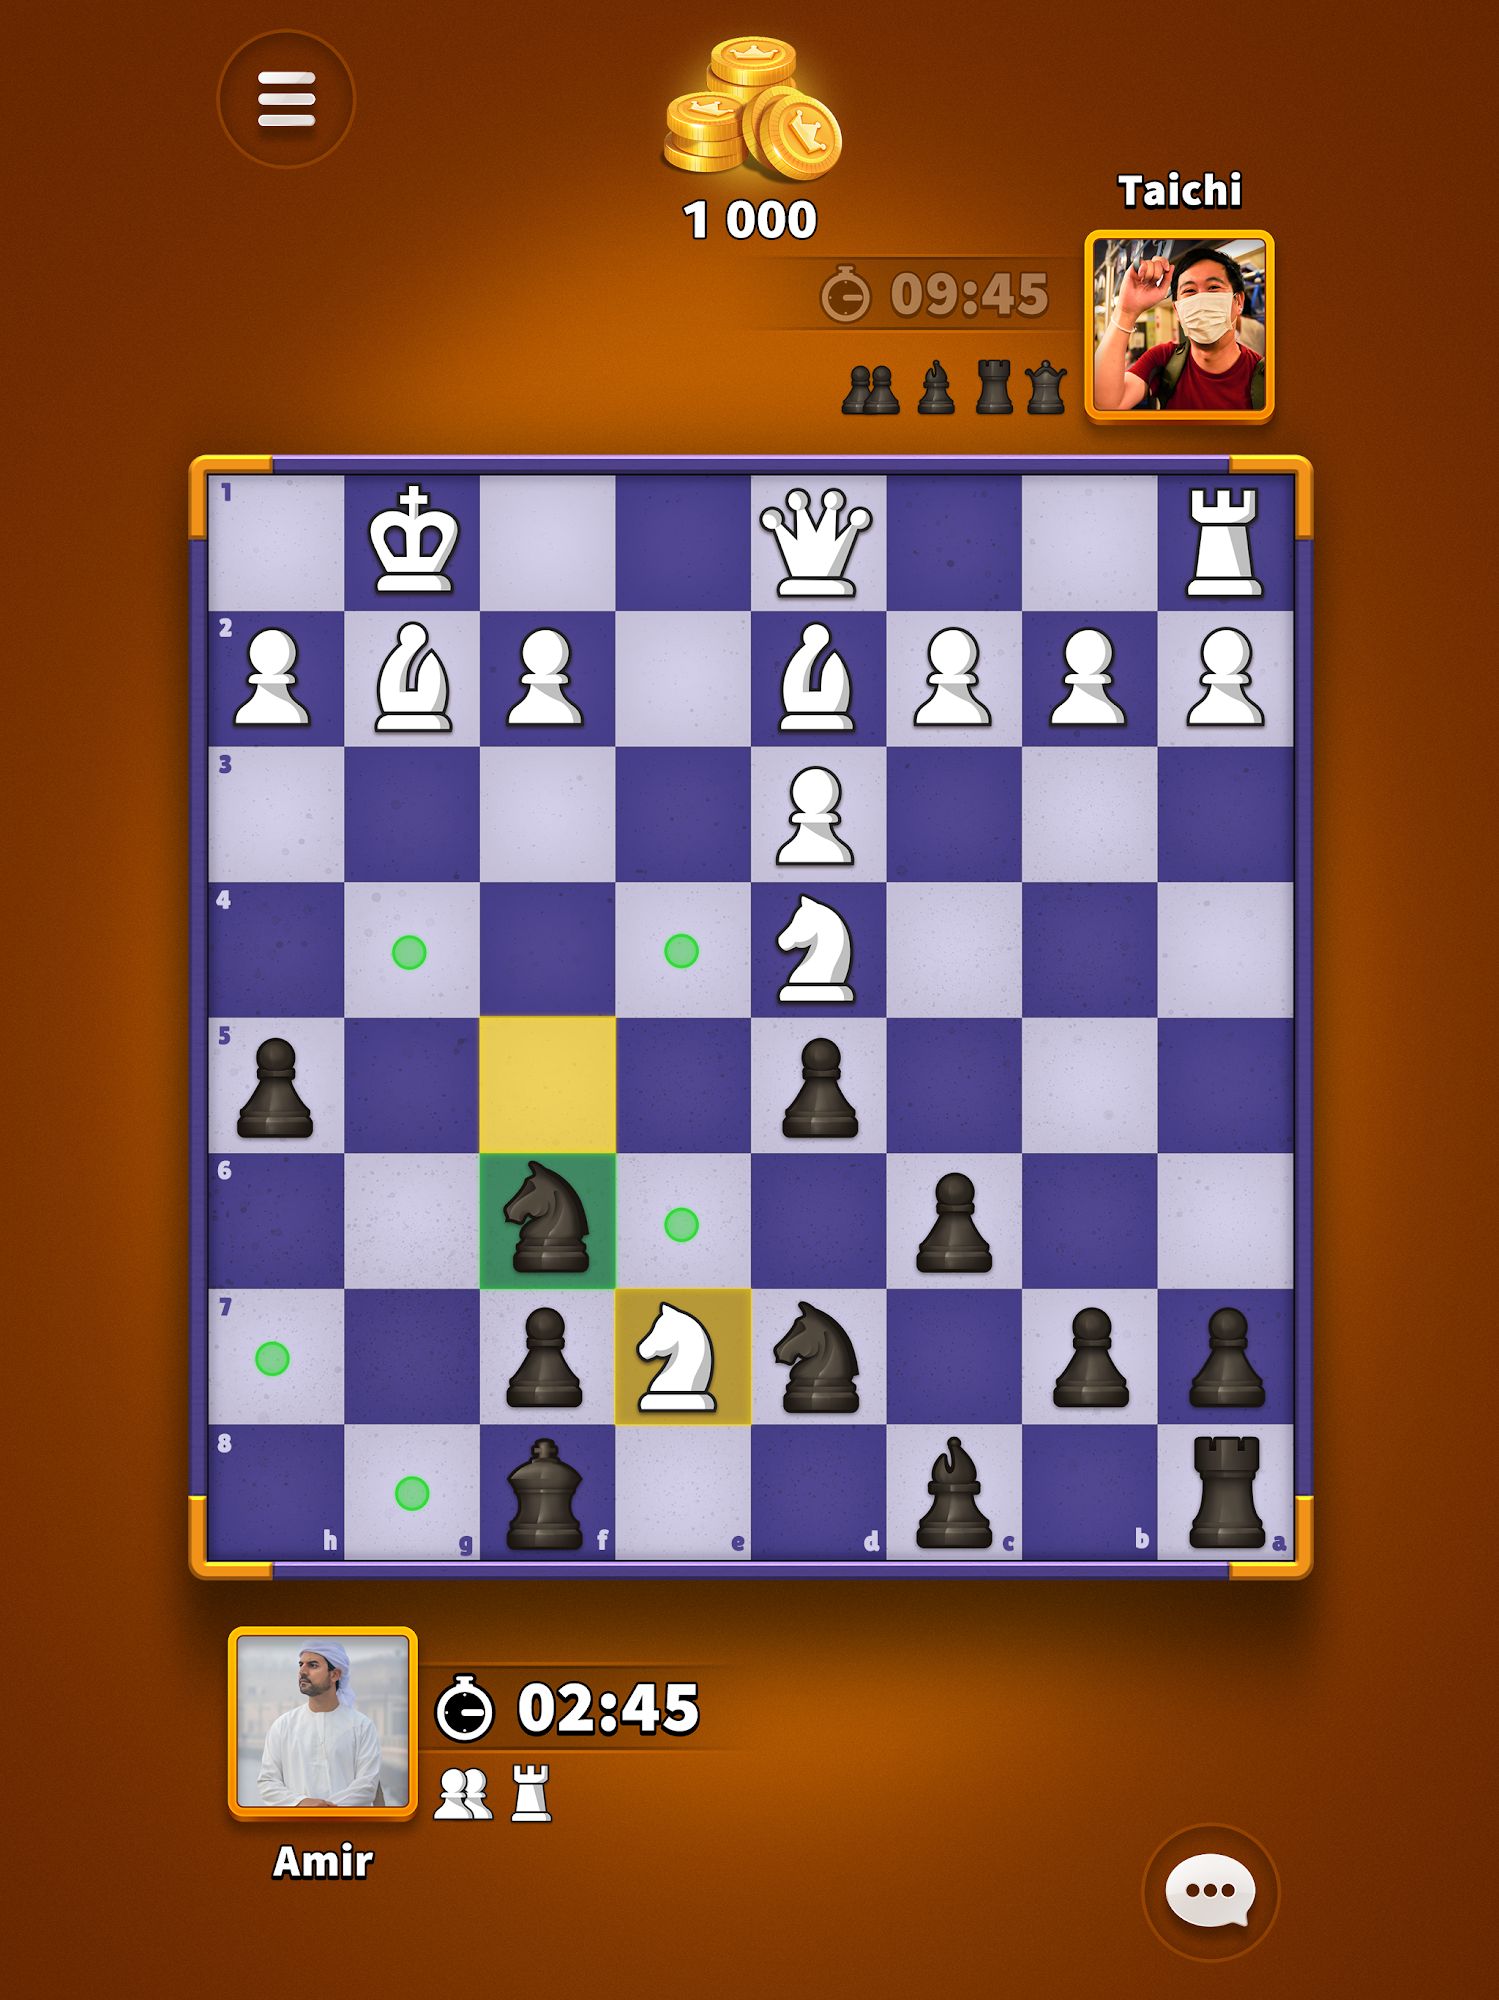 SparkChess Free APK for Android - Download